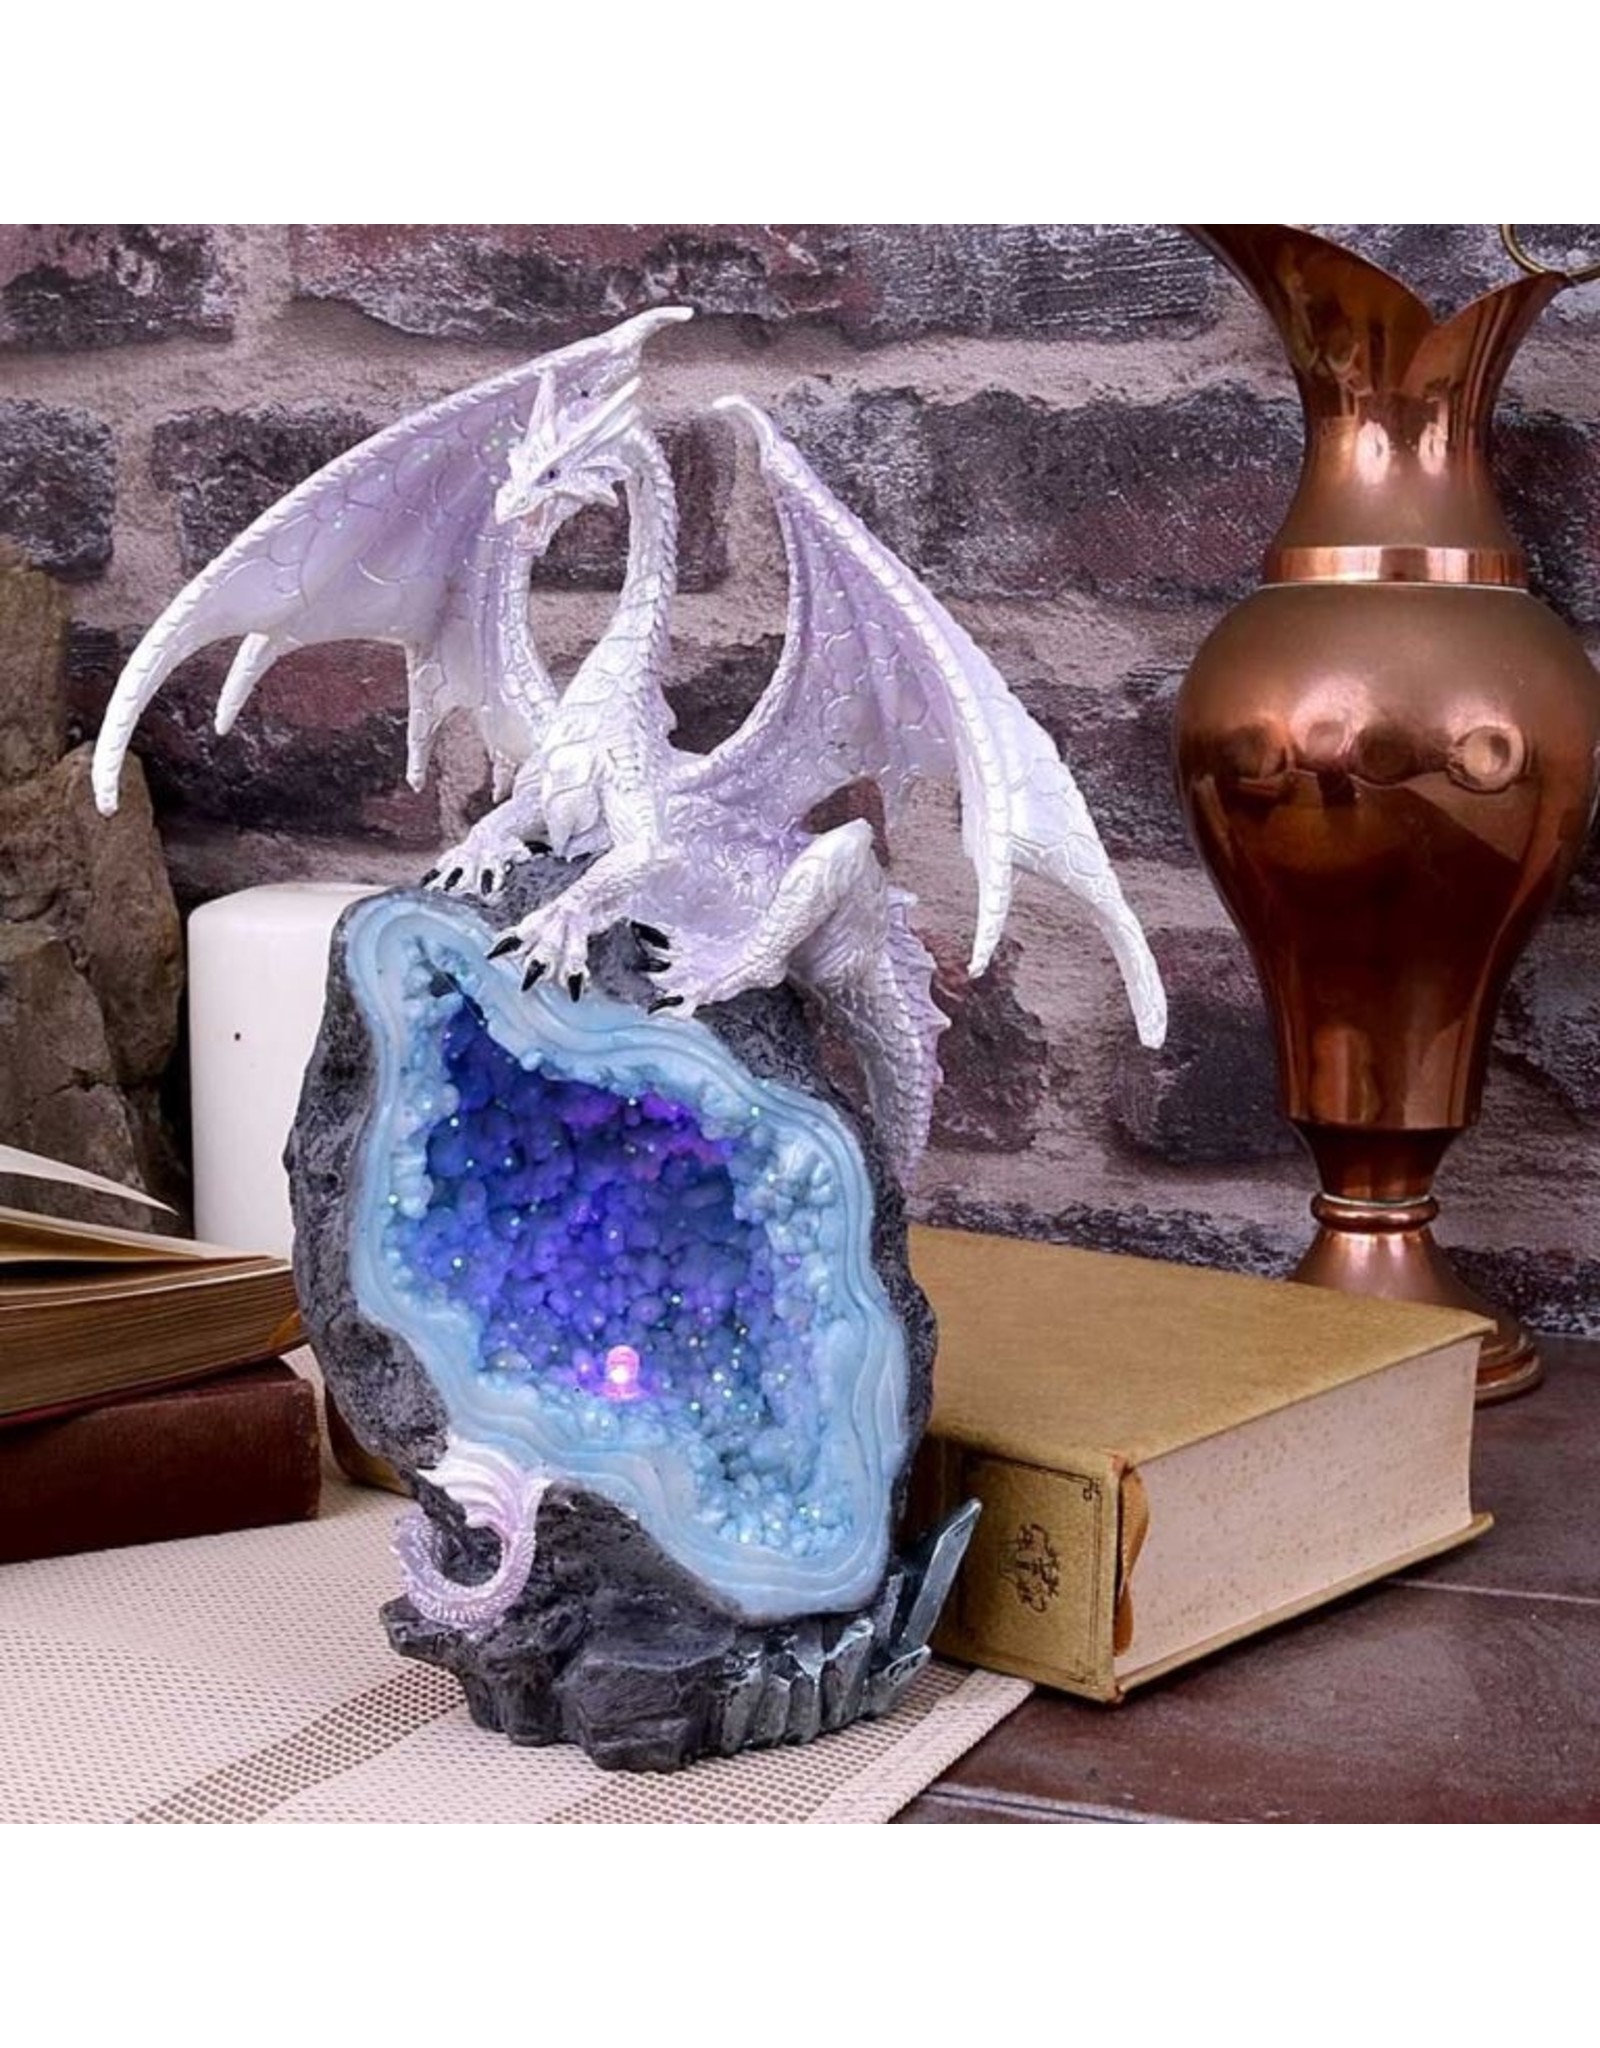 Alator Giftware Figurines Collectables - Glacial Custodian White Dragon Sitting on a Geode LED